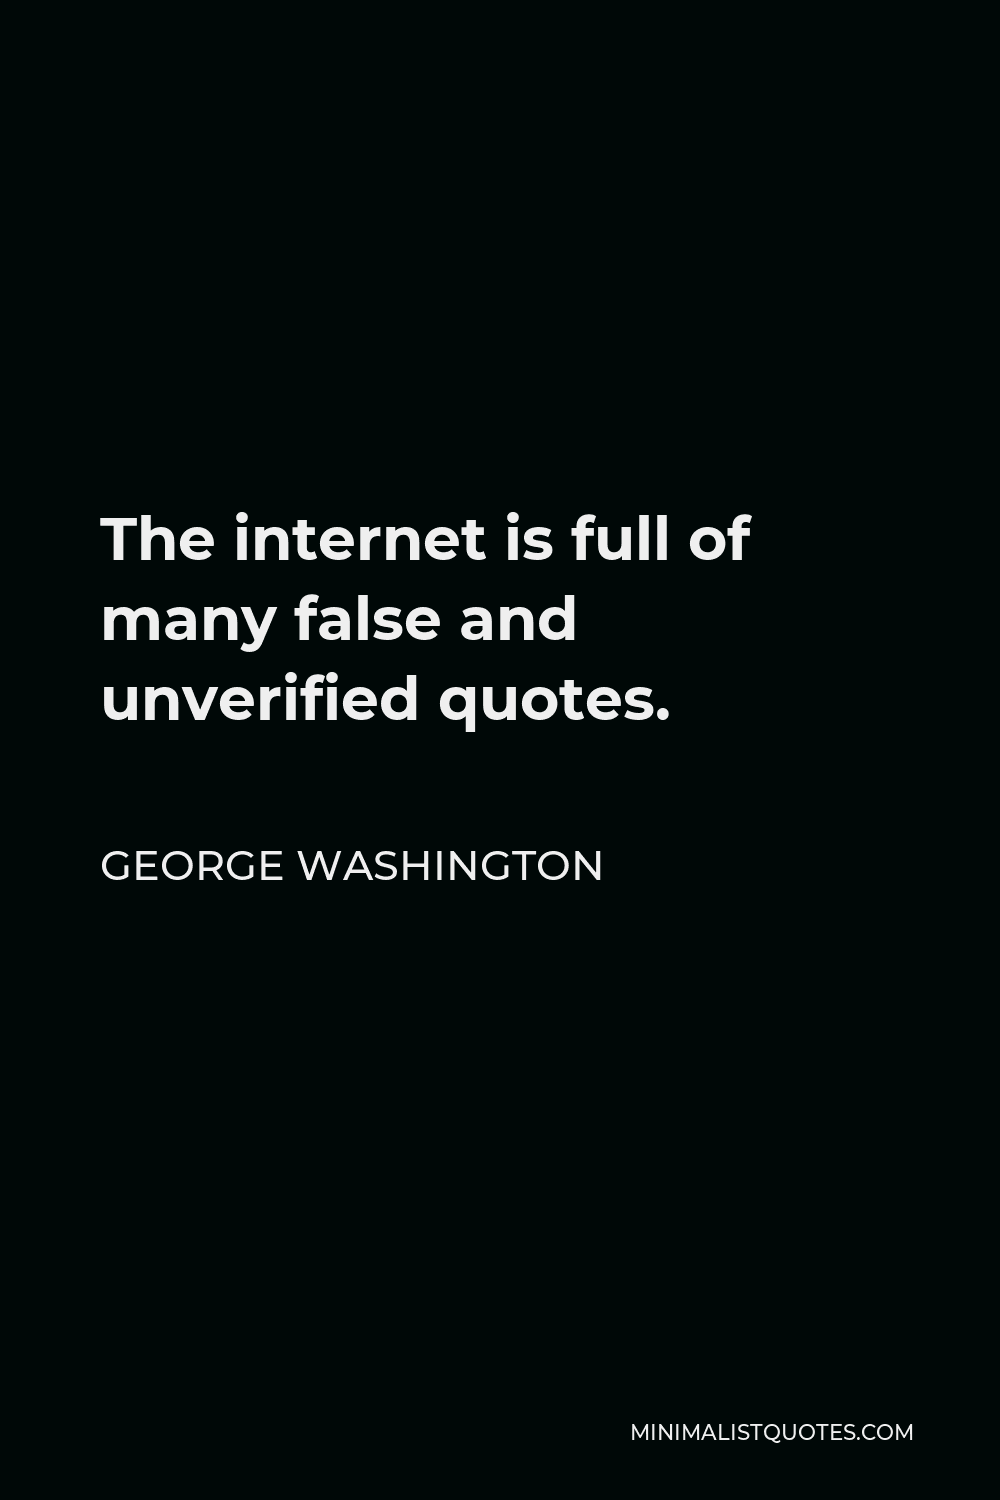 George Washington Quote - The internet is full of many false and unverified quotes.